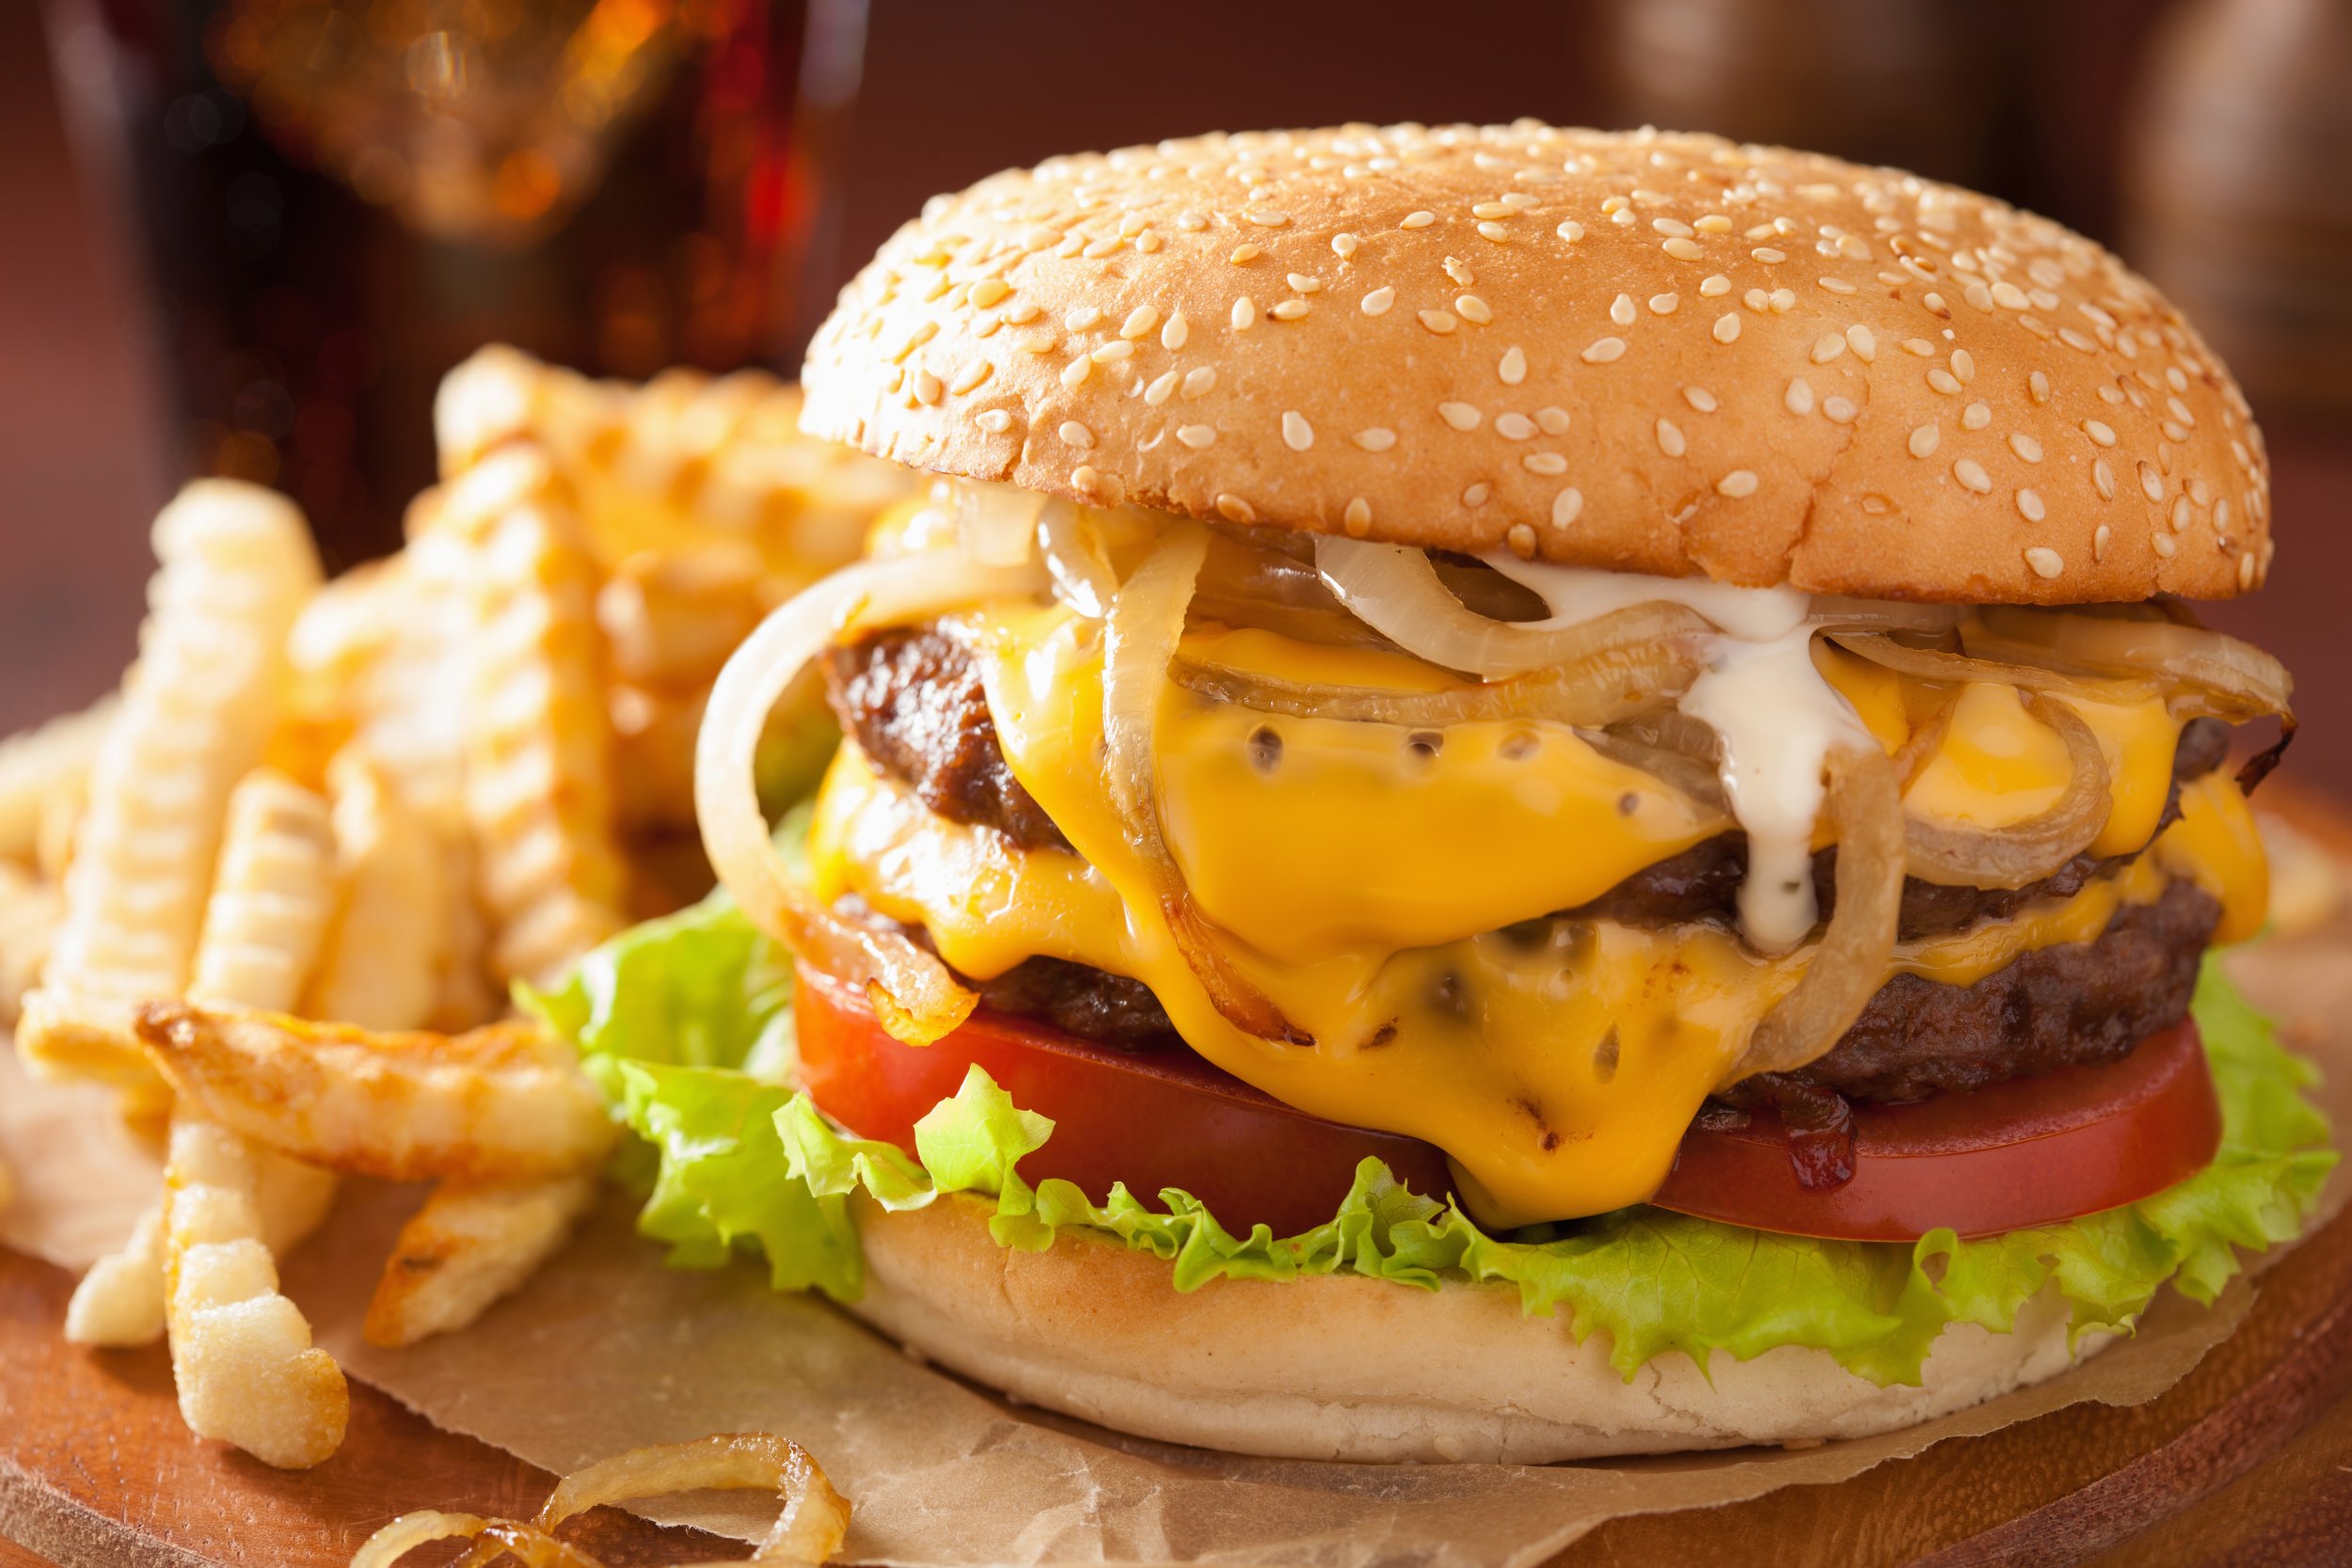 National Cheeseburger Day 2018 Free Burgers, Deals, Offers and More As